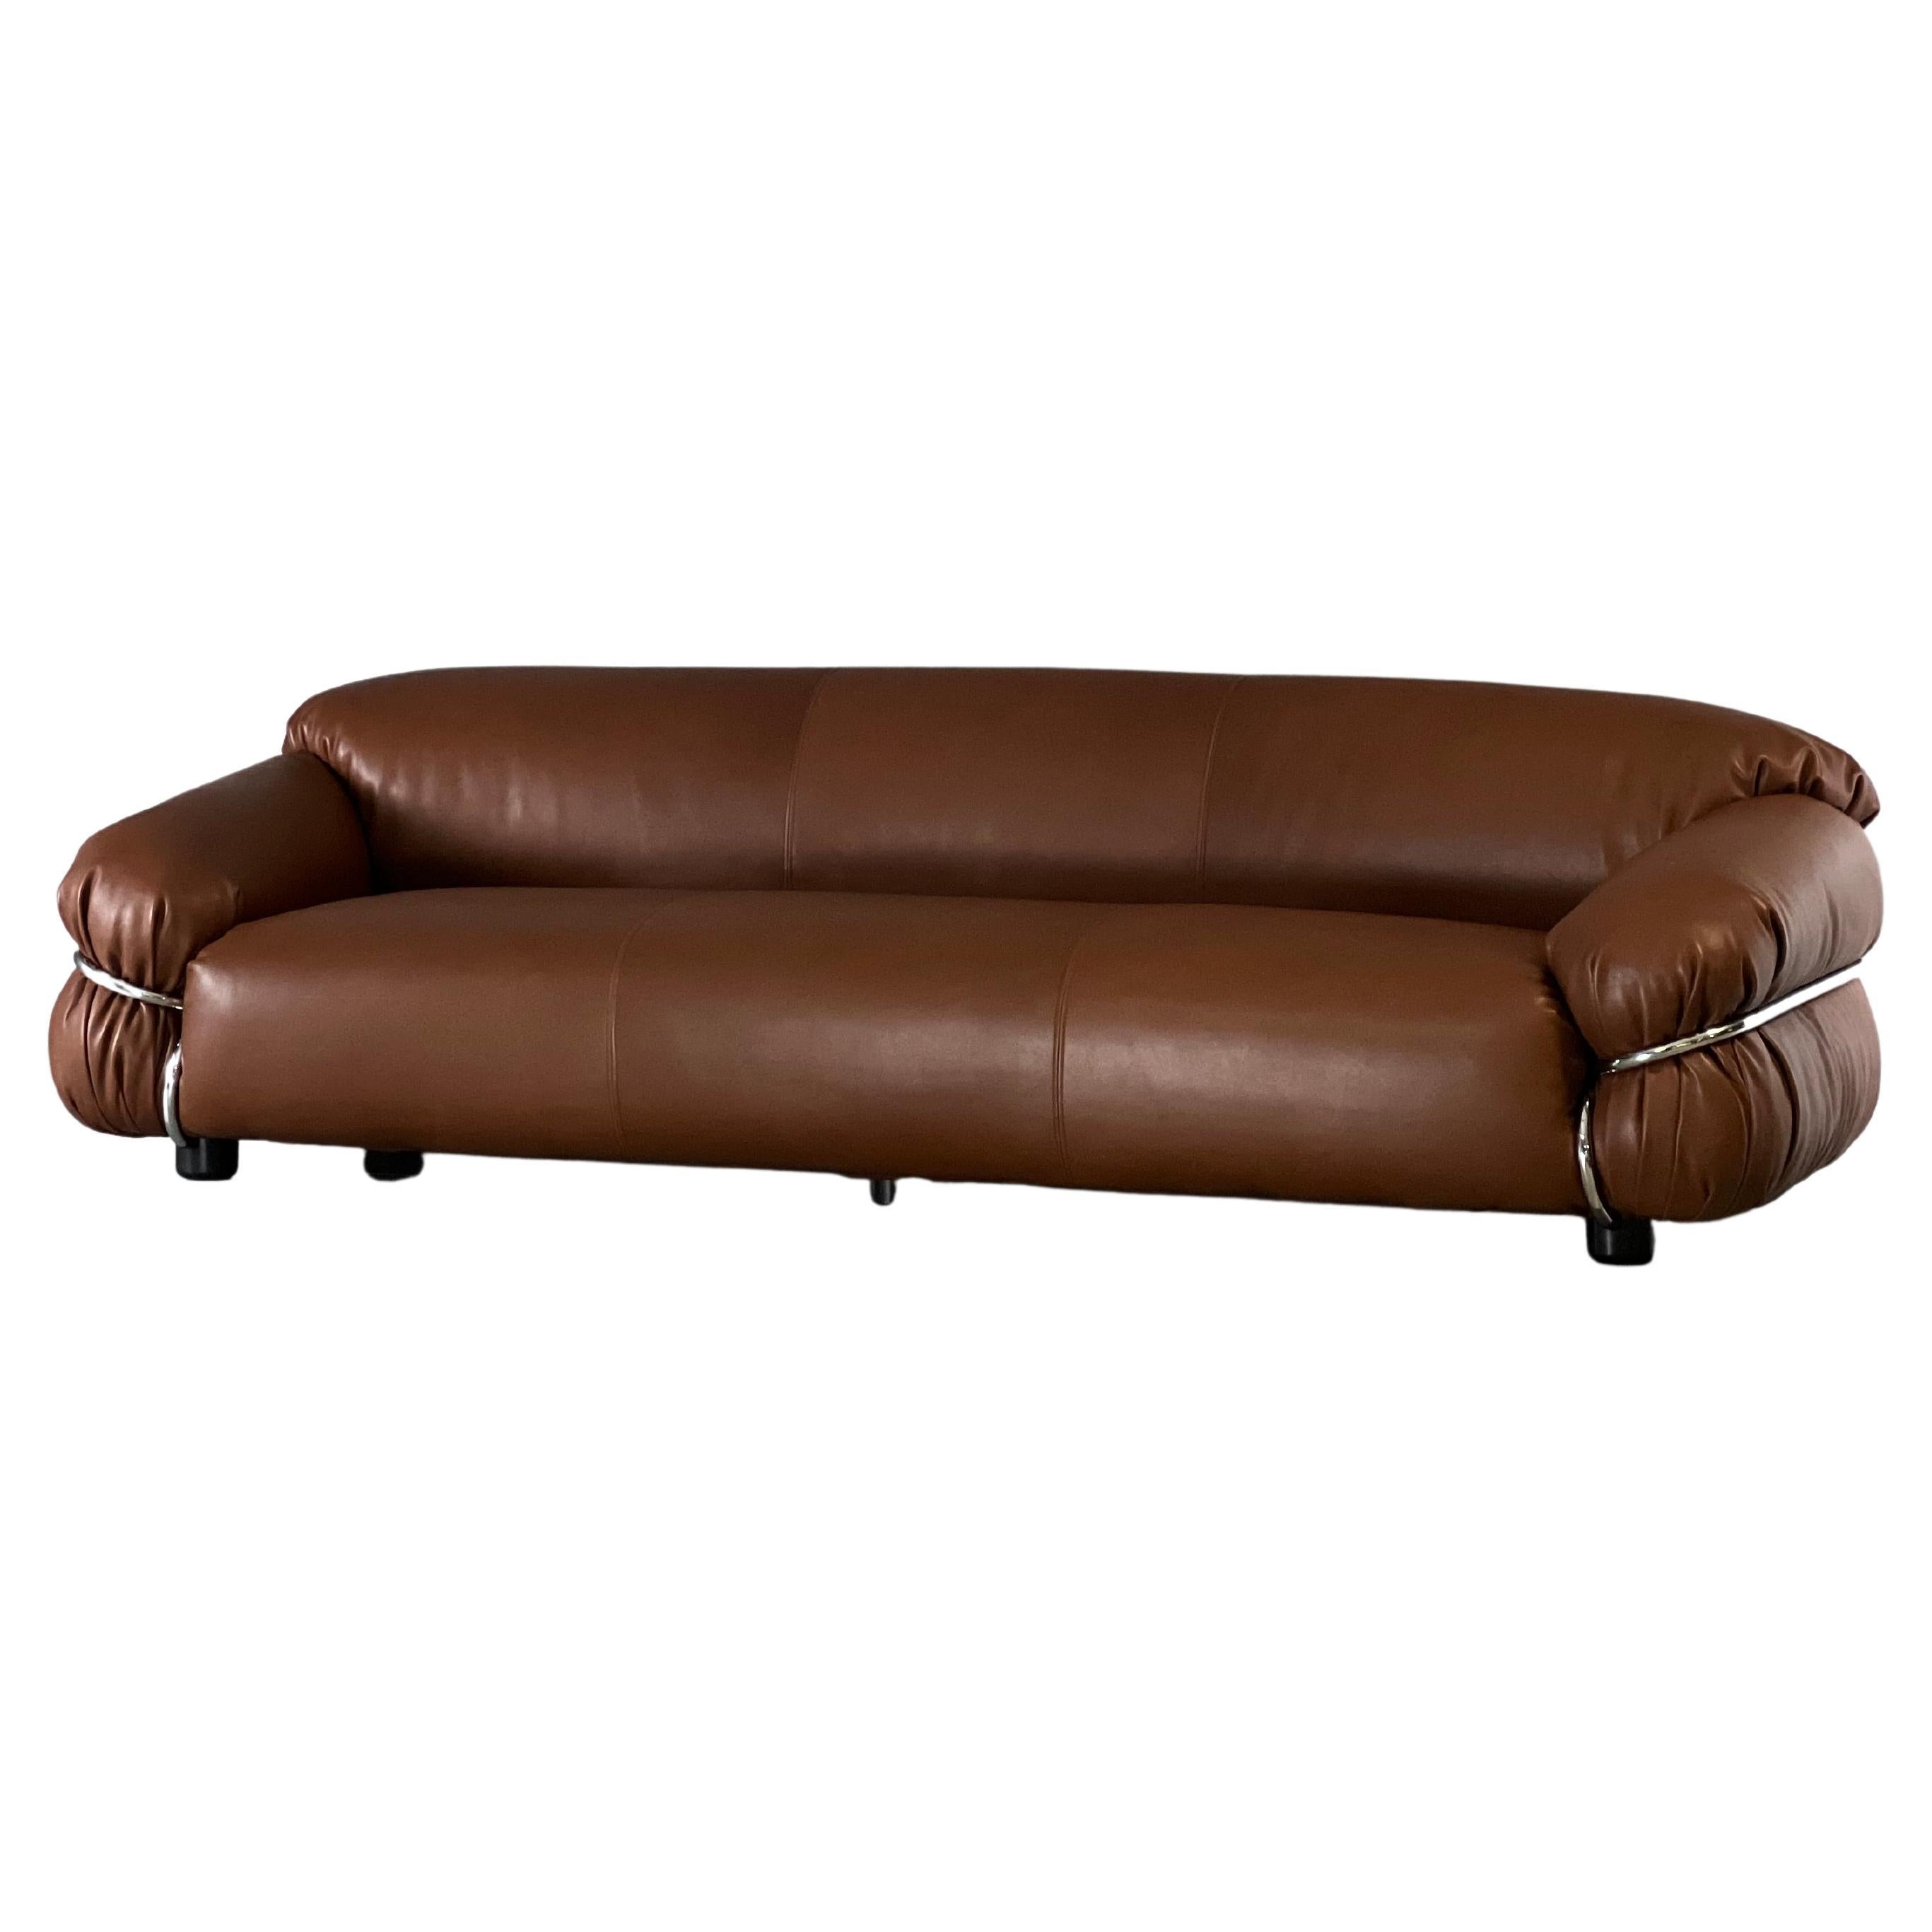 Sesann leather sofa by Giancarlo Frattini for Cassina, Italy, 1970s For Sale